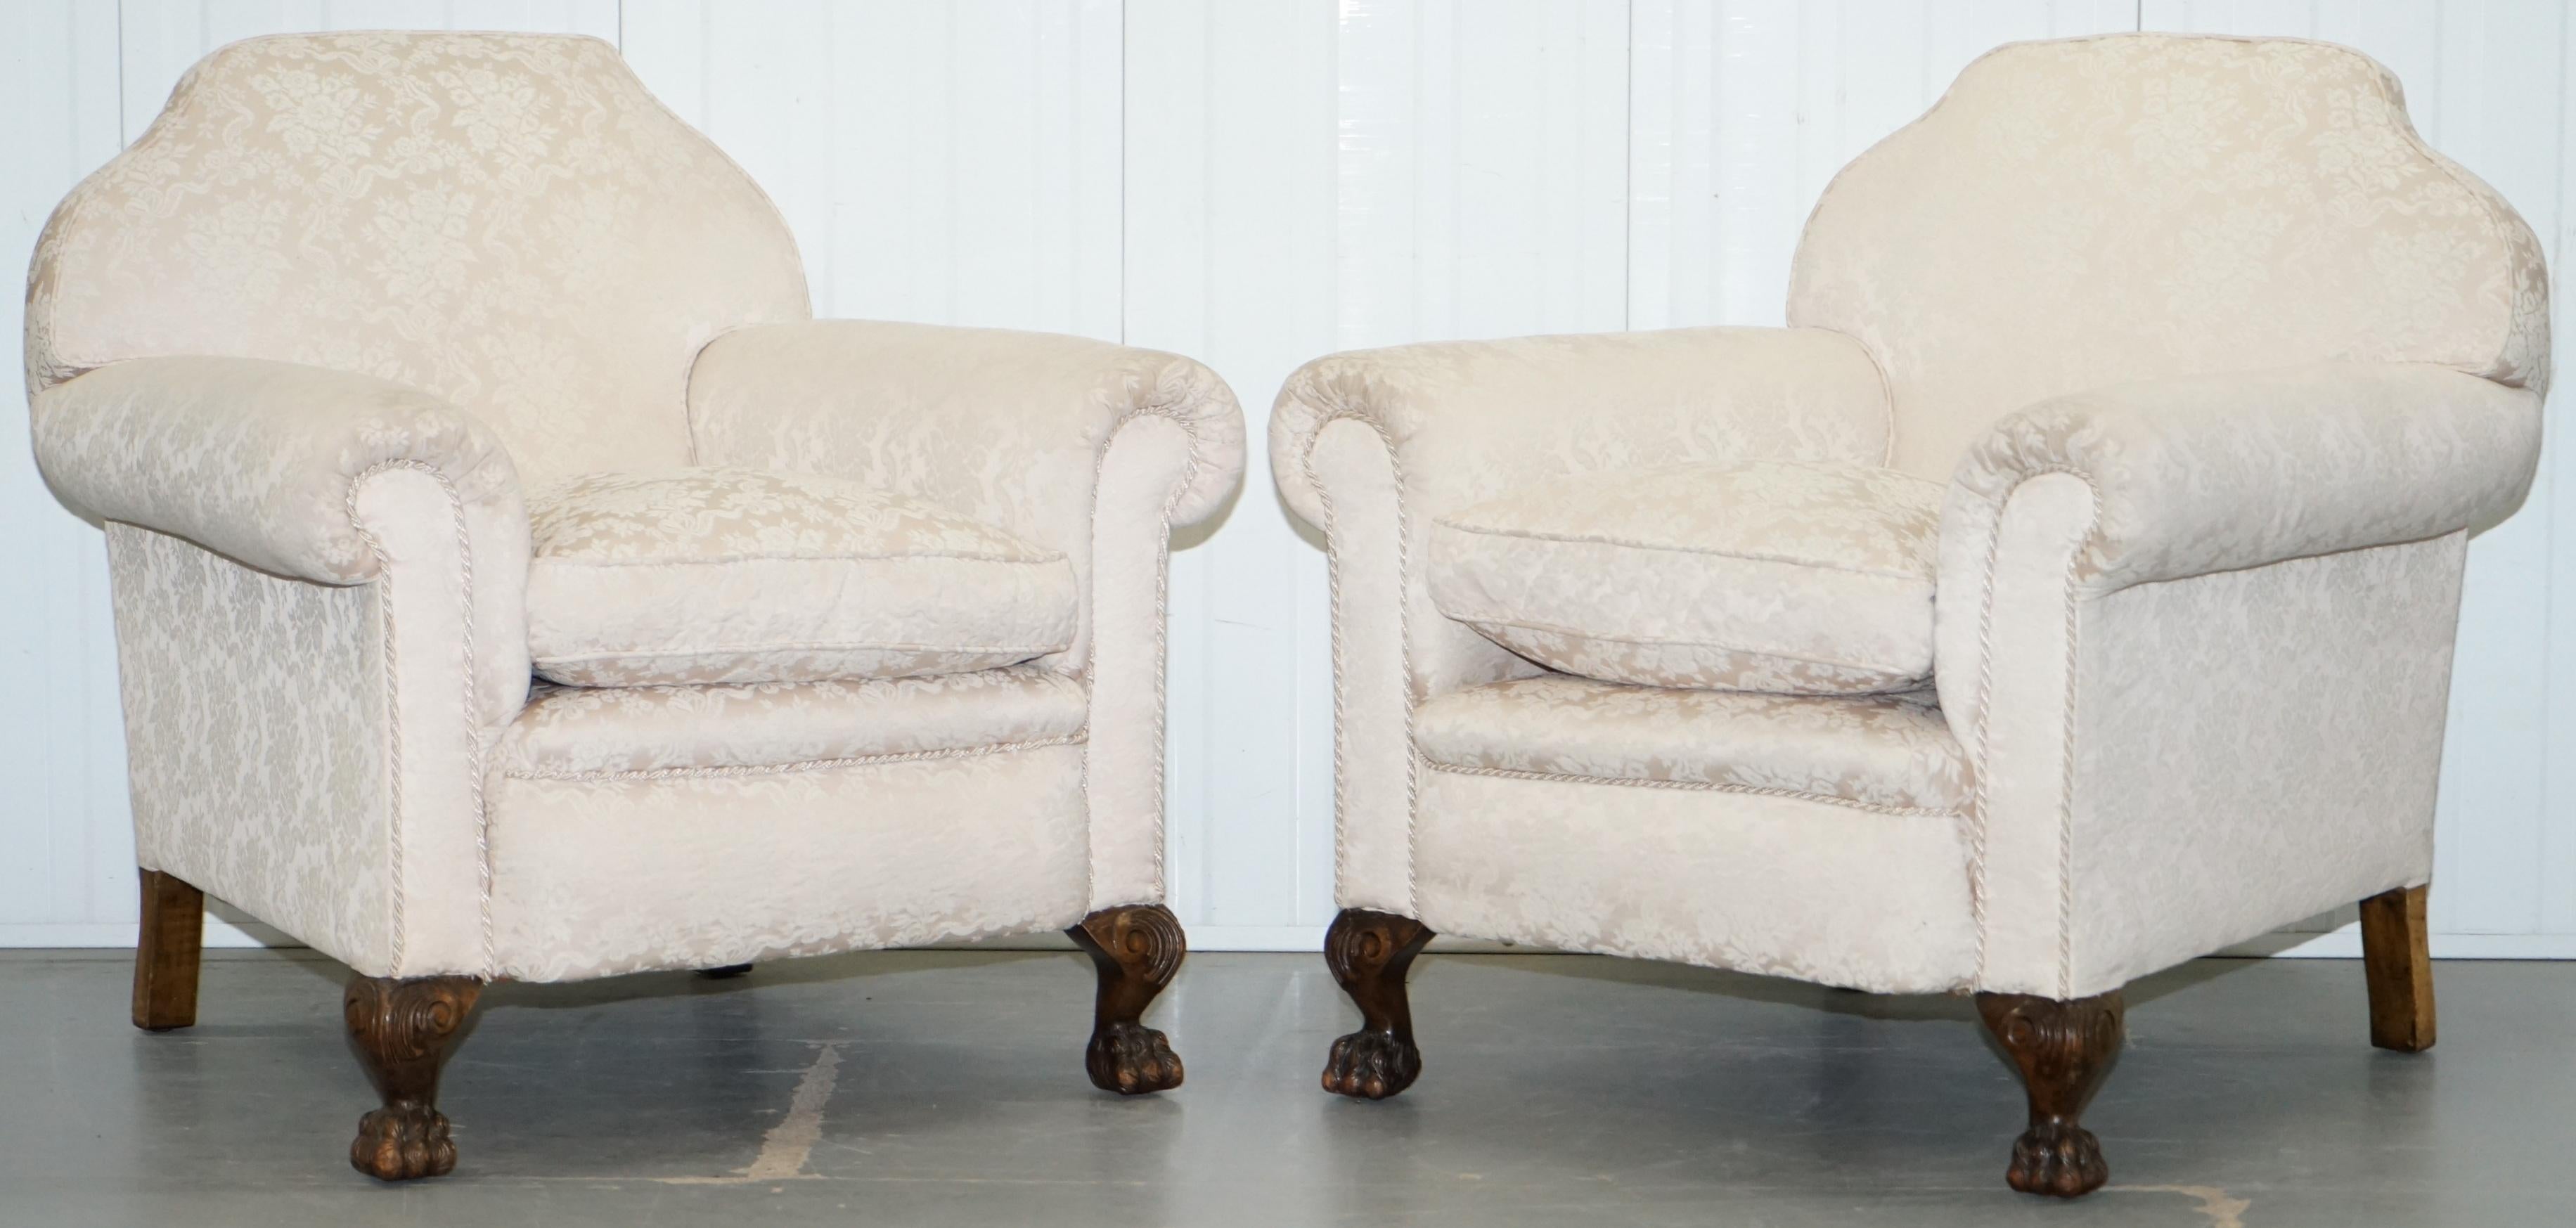 Rare Victorian Damask Upholstery Walnut Carved Lion Paw Feet Sofa Armchair Suite For Sale 7